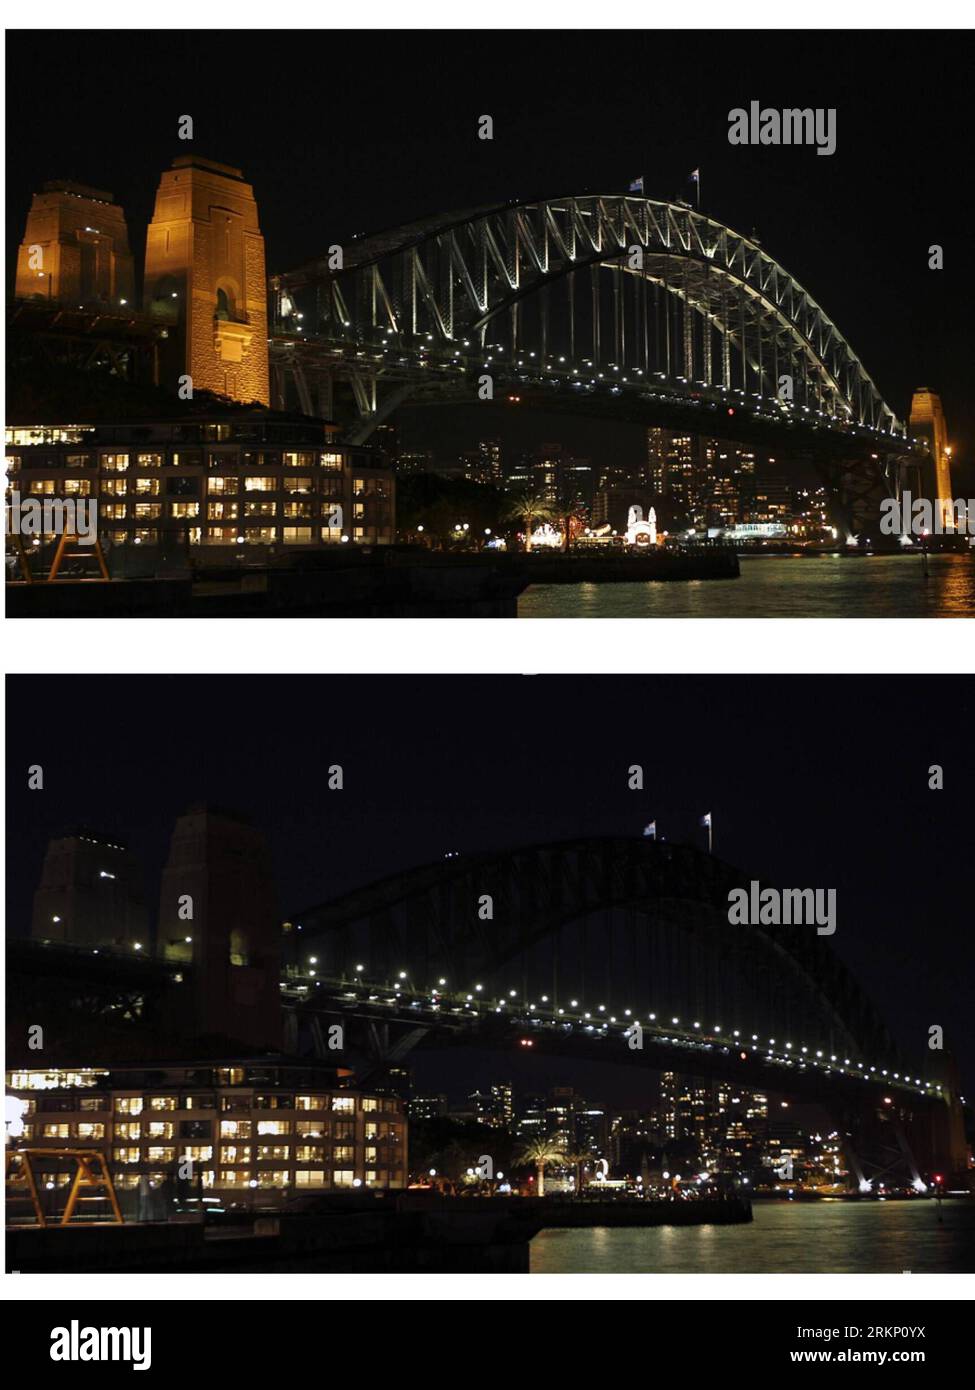 Bildnummer: 57789428  Datum: 31.03.2012  Copyright: imago/Xinhua (120331) -- SYDNEY, March 31, 2012 (Xinhua) -- The combo photo taken on March 31, 2012 shows Sydney Harbour Bridge before (top) and during the Earth Hour in Sydney, Australia. The Earth Hour, initiated by the World Wild Fund for Nature in 2007, calls on families and buildings to turn off the lights for one hour on the last Saturday night of March. (Xinhua/Jin Linpeng) (zjl) AUSTRALIA-SYDNEY-EARTH HOUR PUBLICATIONxNOTxINxCHN Gesellschaft Klimaschutz Umweltschutz earth hour xda x0x 2012 hoch      57789428 Date 31 03 2012 Copyright Stock Photo